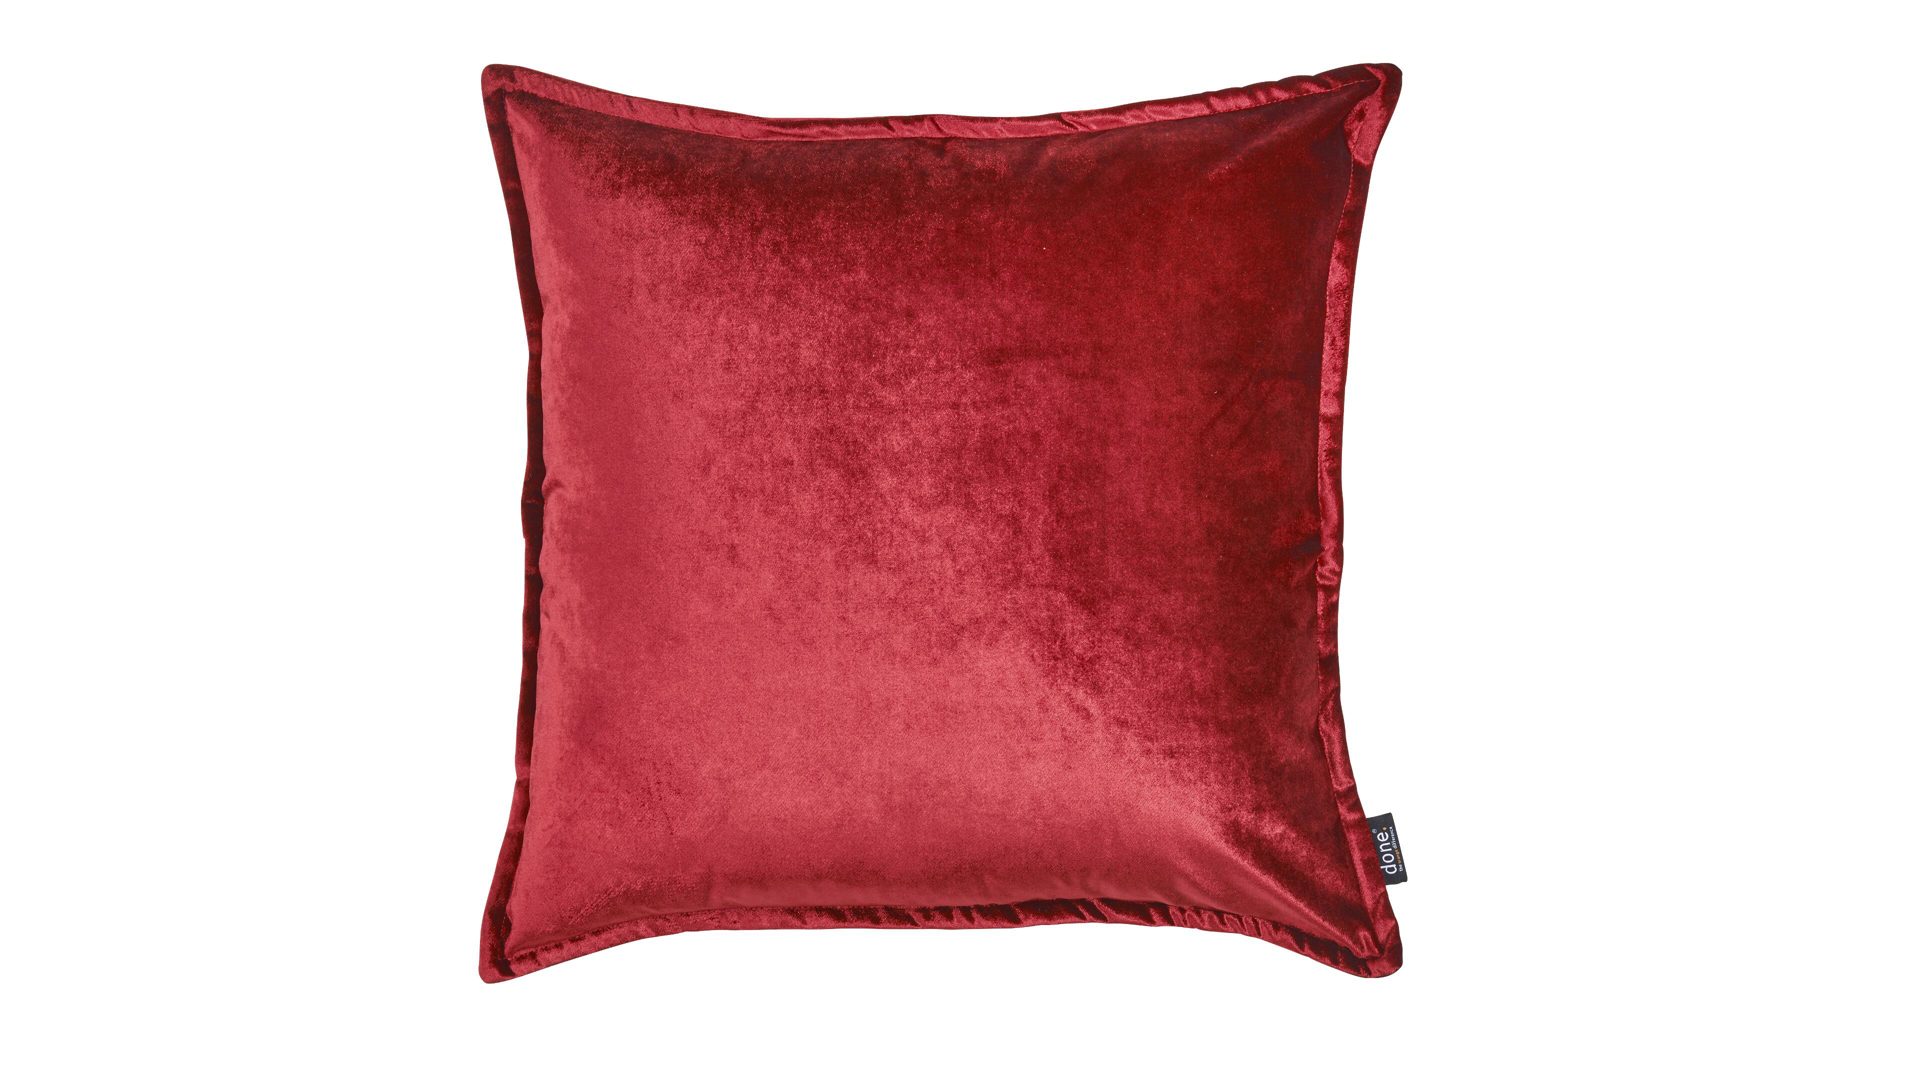 Kissenbezug /-hülle Done.® aus Stoff in Dunkelrot done.® Kissenhülle Cushion Glam roter Samt – ca. 65 x 65 cm